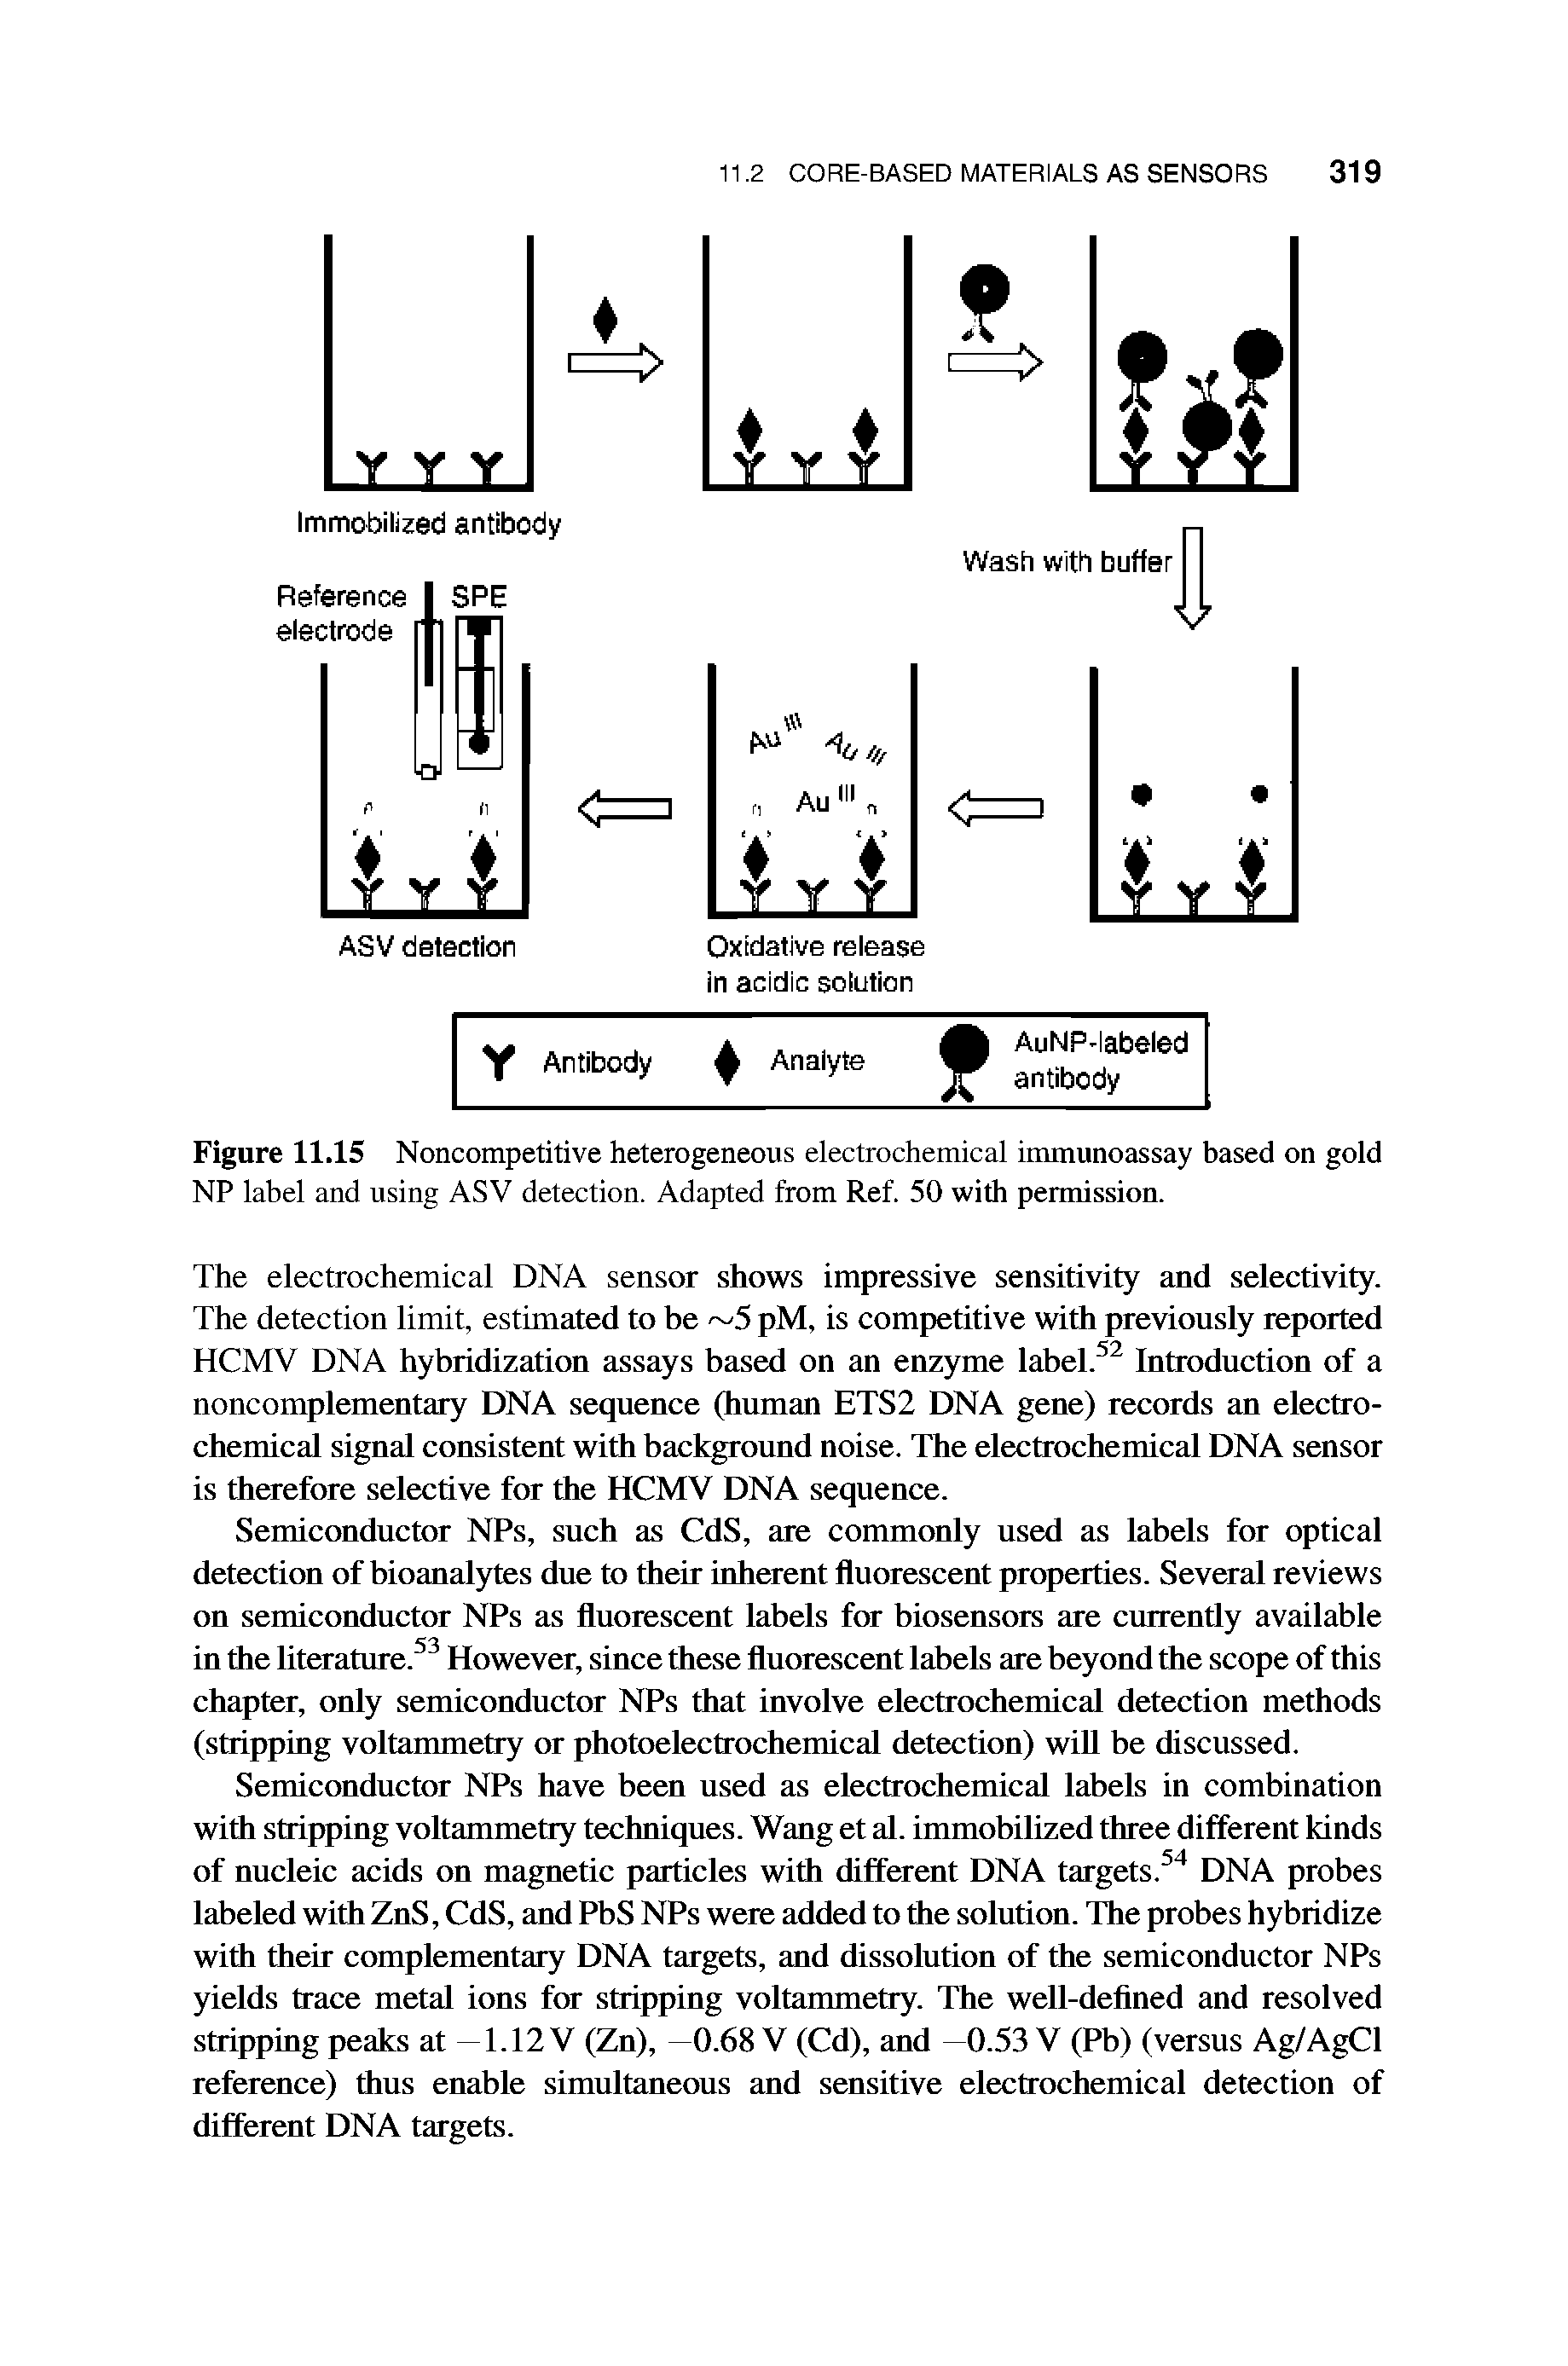 Figure 11.15 Noncompetitive heterogeneous electrochemical immunoassay based on gold NP label and using ASV detection. Adapted from Ref. 50 with permission.